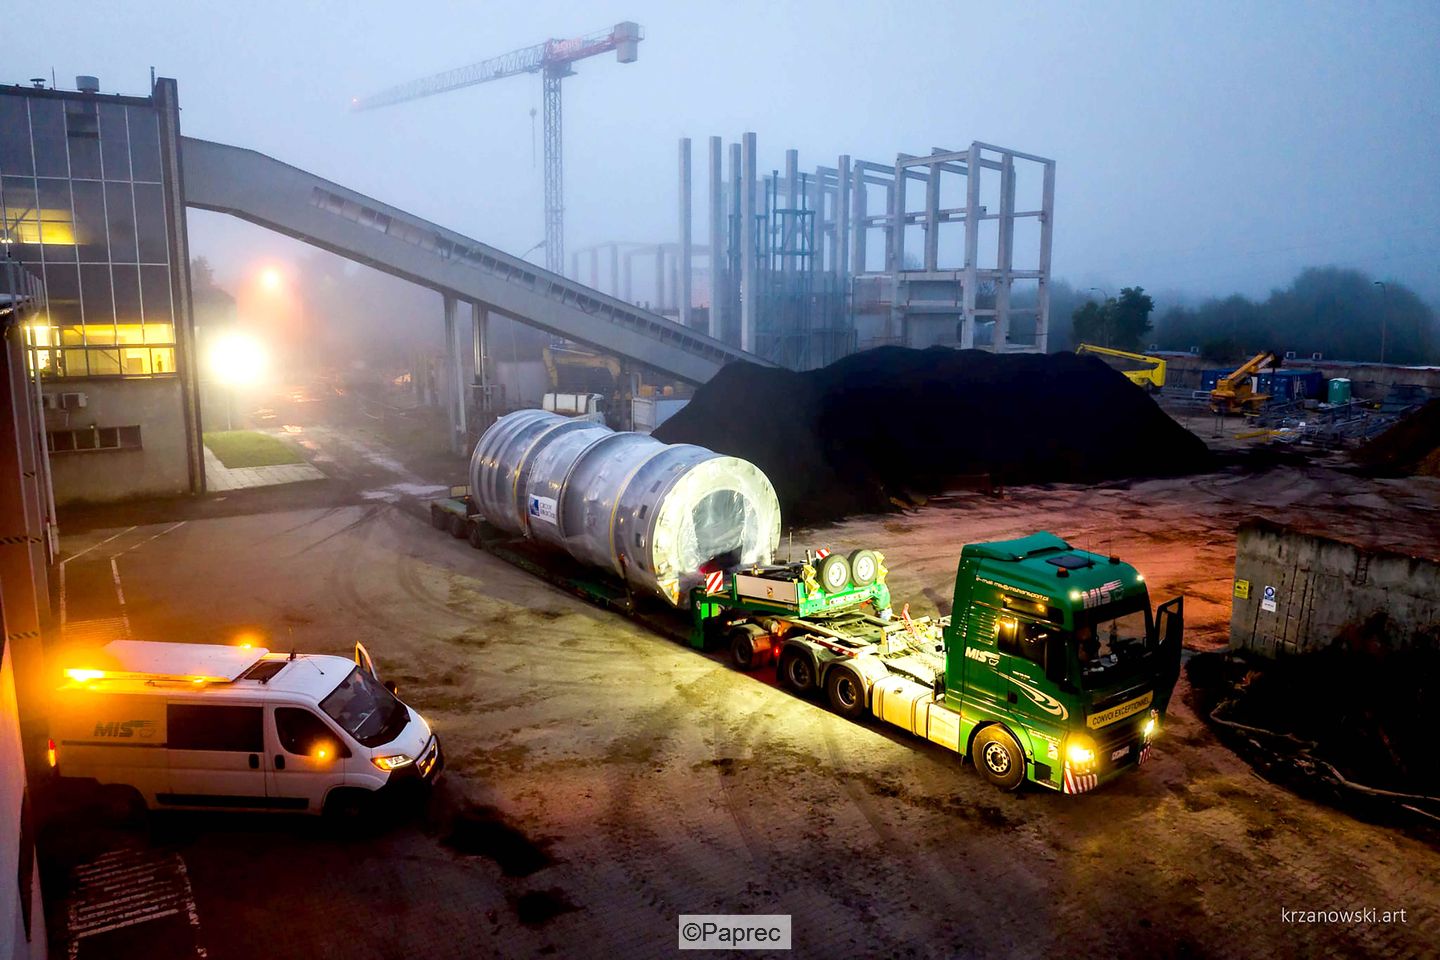 Furnace is delivered for the boiler plant Paprec Energies is building in Krosno, Poland